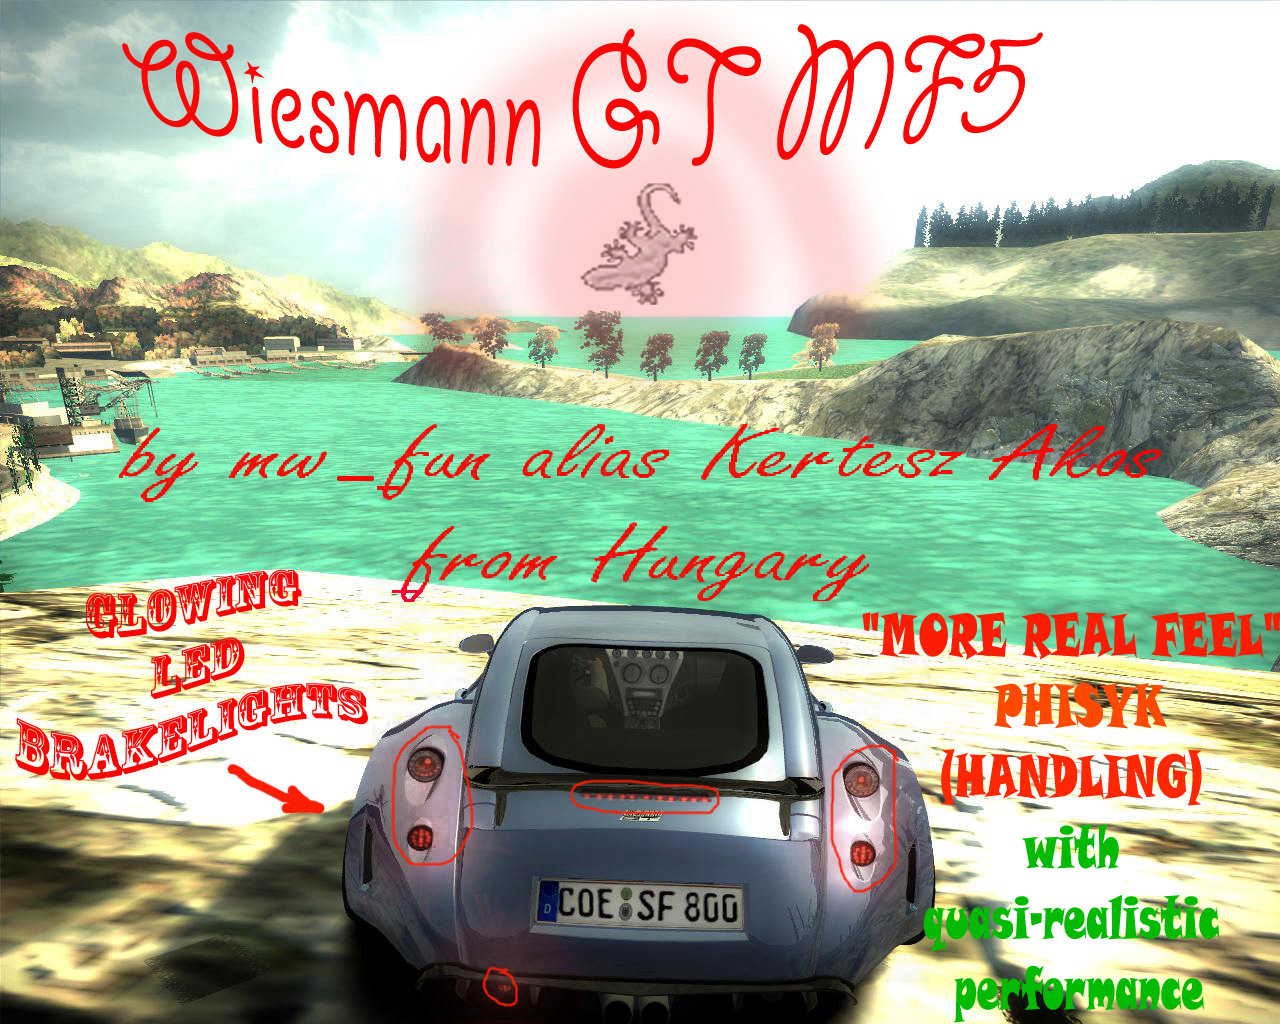 Need For Speed Most Wanted Various Wiesmann GT MF5 (WITH GLOWING LED BRAKELIGHTS OPTION)